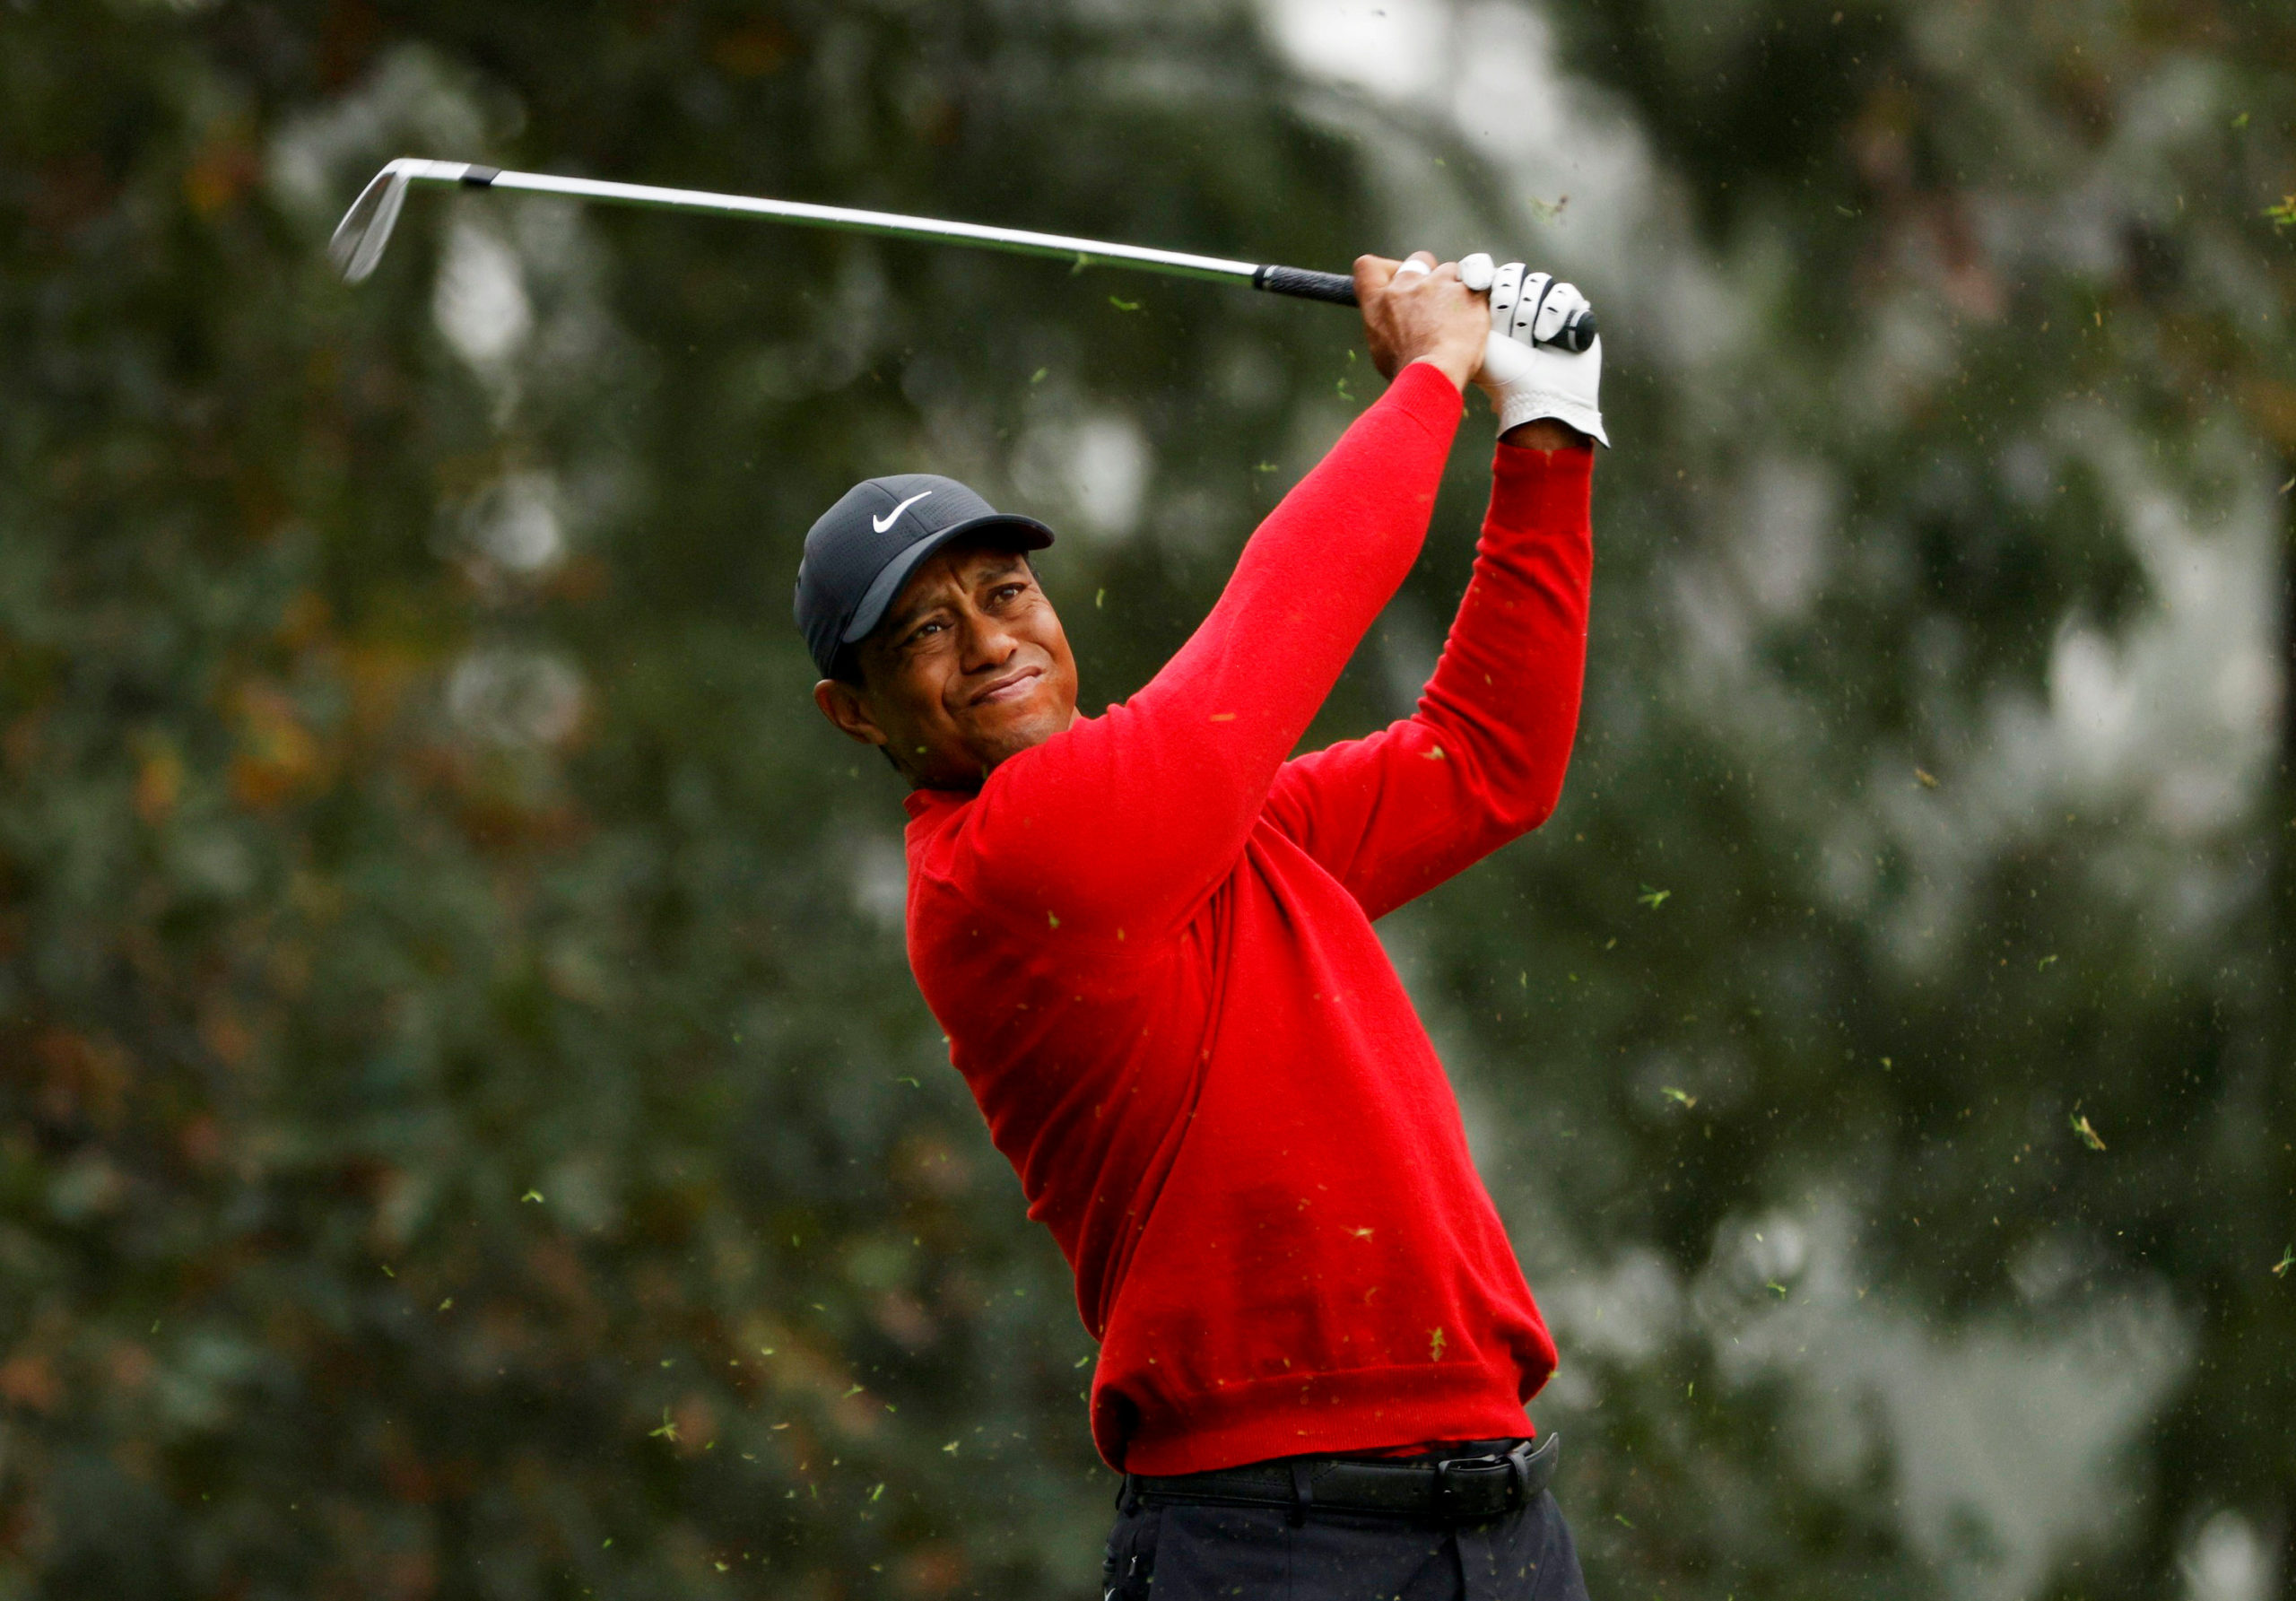 FILE PHOTO: Golf - The Masters - Augusta National Golf Club - Augusta, Georgia, U.S. - November 15, 2020 Tiger Woods of the U.S. on the 4th hole during the final round R